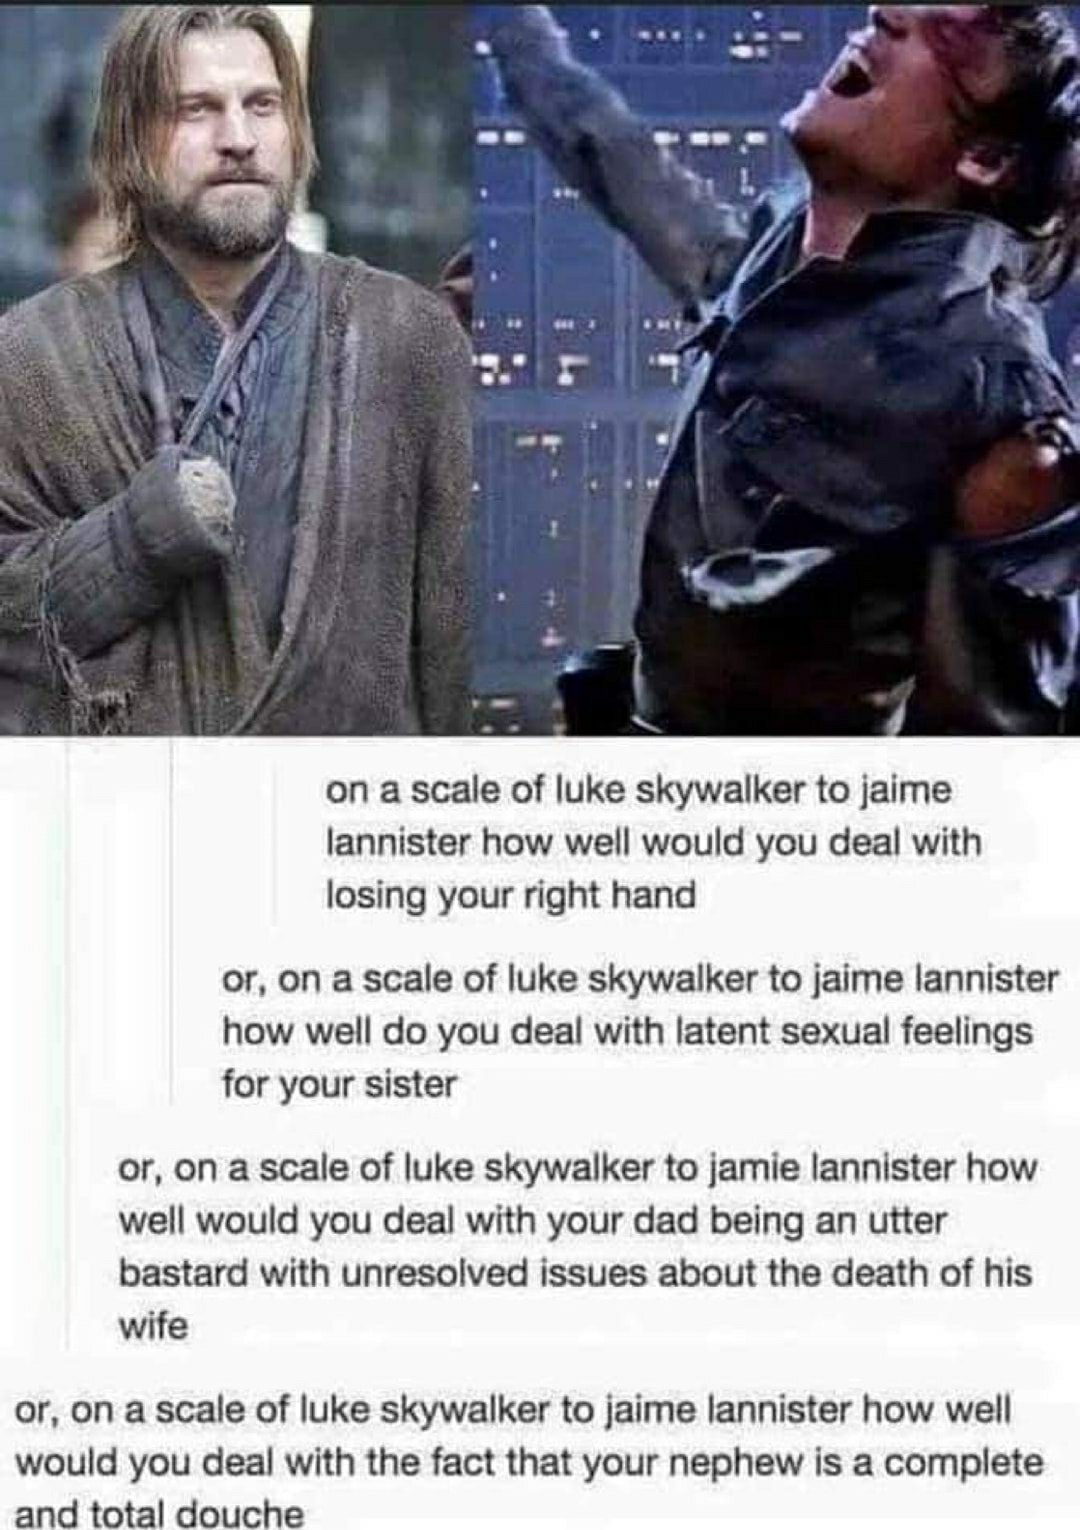 hand cut off - on a scale of luke Skywalker to jaime lannister how well would you deal with losing your right hand or, on a scale of luke skywalker to jaime lannister how well do you deal with latent sexual feelings for your sister or, on a scale of luke 